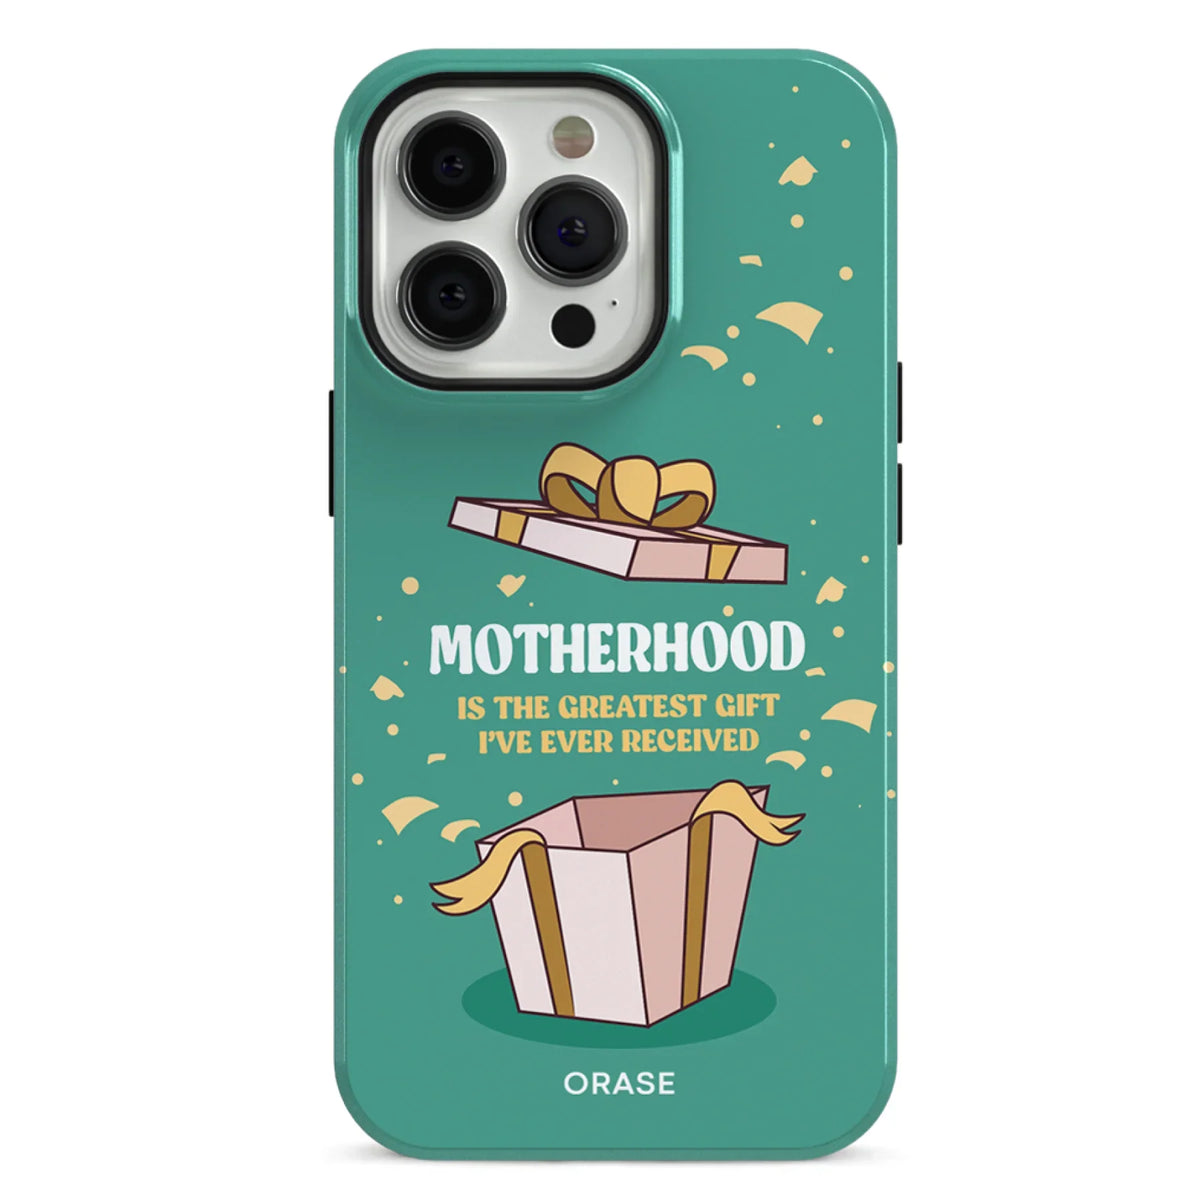 Motherhood Is The Greatest Gift iPhone Case - iPhone 11